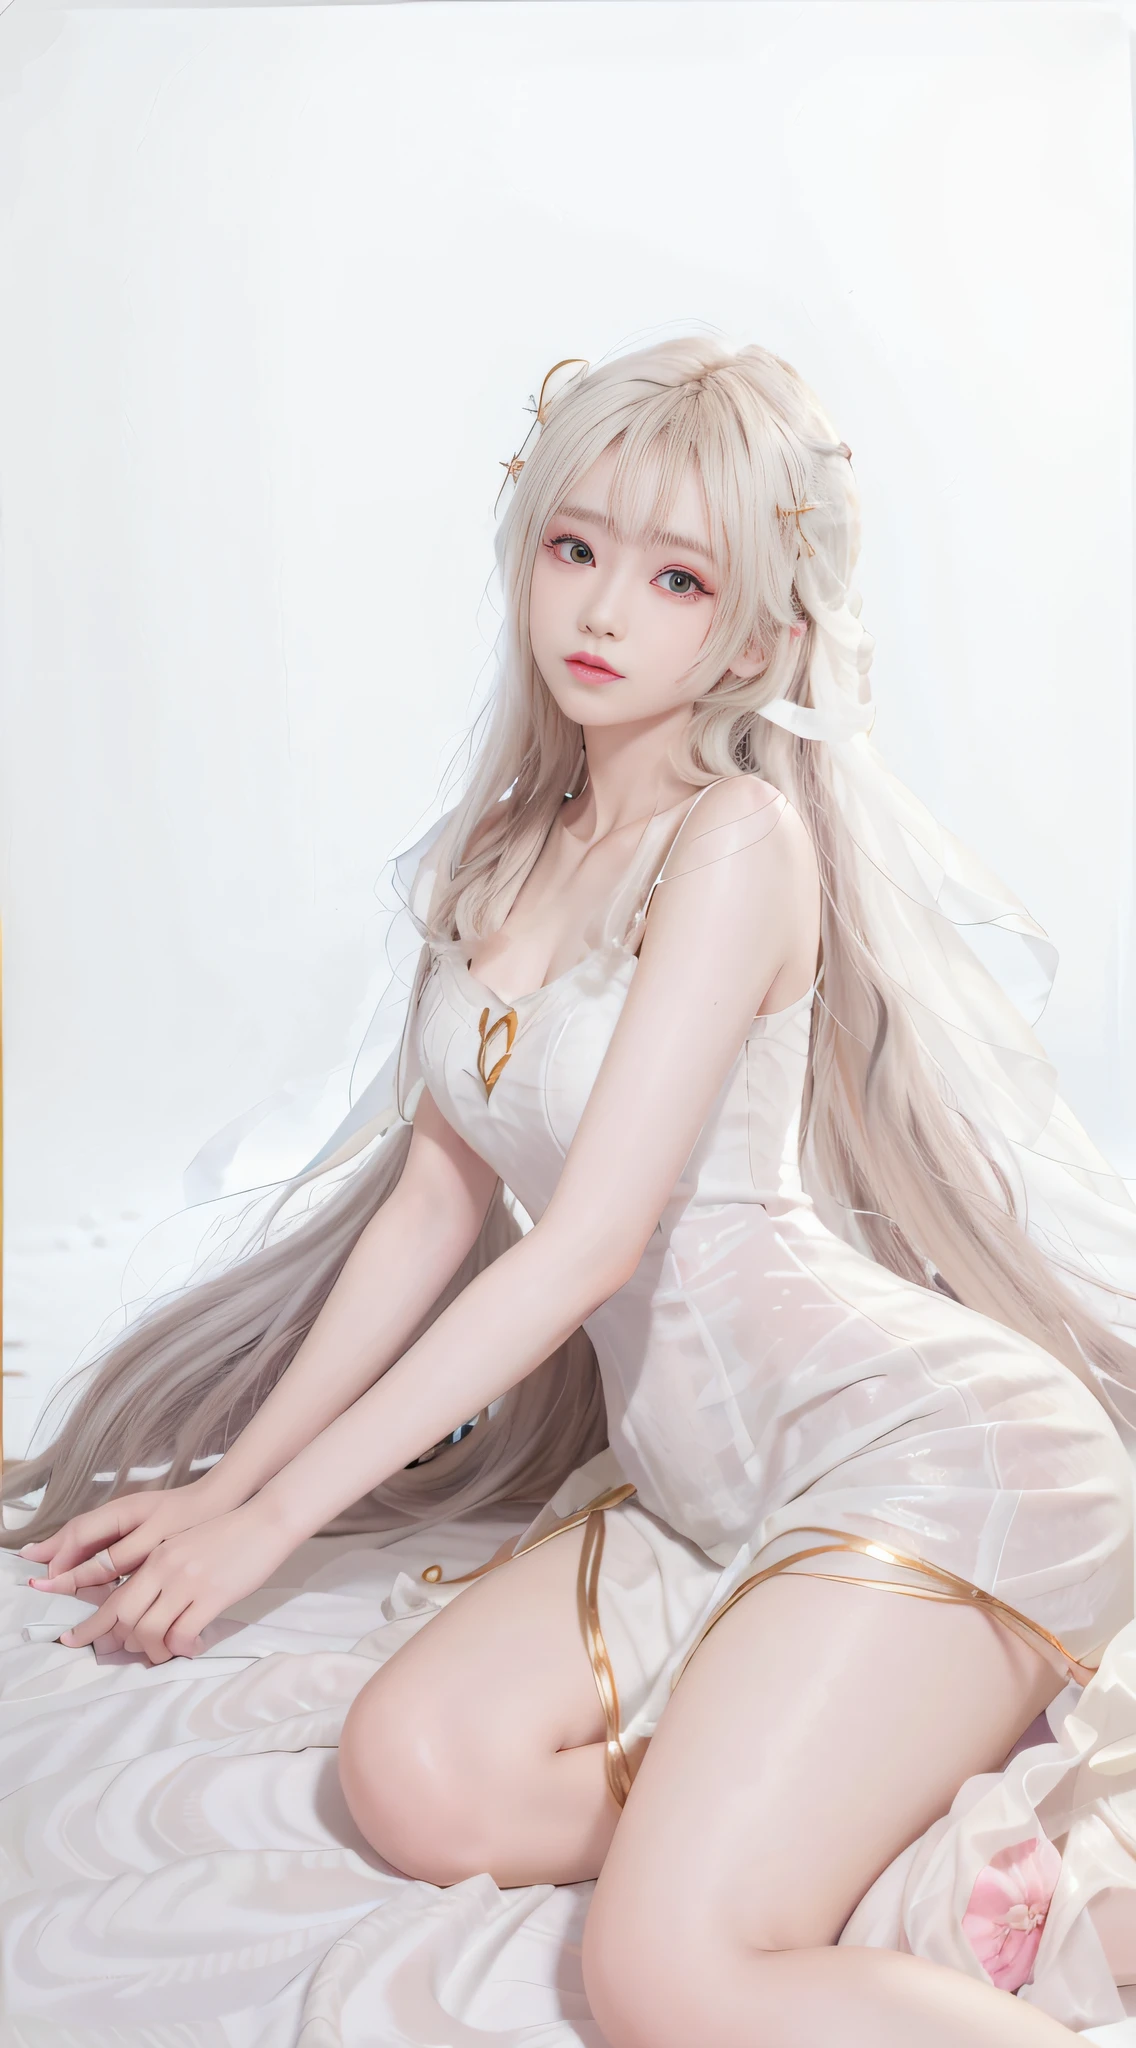 closeup on face, Face shot, (White dress :1.7), short  miko skirt, Long streamers, blonde hairs, golden hair, (Pointed ears: 1.5), (Gold pattern quality:1.3), female pubic hair, with long blond hair, Off-the-Shoulders, Top detail CG quality 4K wallpaper, Master, A Masterpiece, portraits, The middle, Watch the footage, Beautiful Chinese-Korean mixed race idol, ((Super fine face, detailed description of facial features)), Lip biting makeup, Sweet smile, Perfect facial features, Model figure, Good complexion, the trees, branches, Golden meadow, stream, Golden leaves, Evening, Twilight, The setting sun, Twilight, autumn, twin braids, hair strand, diagonal bangs, hair ribbon, hair ornament, forehead jewel, jeweled branch of hourai, crescent hair ornament, fish hair ornament, hime cut, low ponytail, realism, god rays, sparkle, cinematic lighting, lens flare, UHD, high details, high quality, highres, best quality, 8k, 16k, high details, high quality, super detail, anatomically correct, masterpiece, ccurate